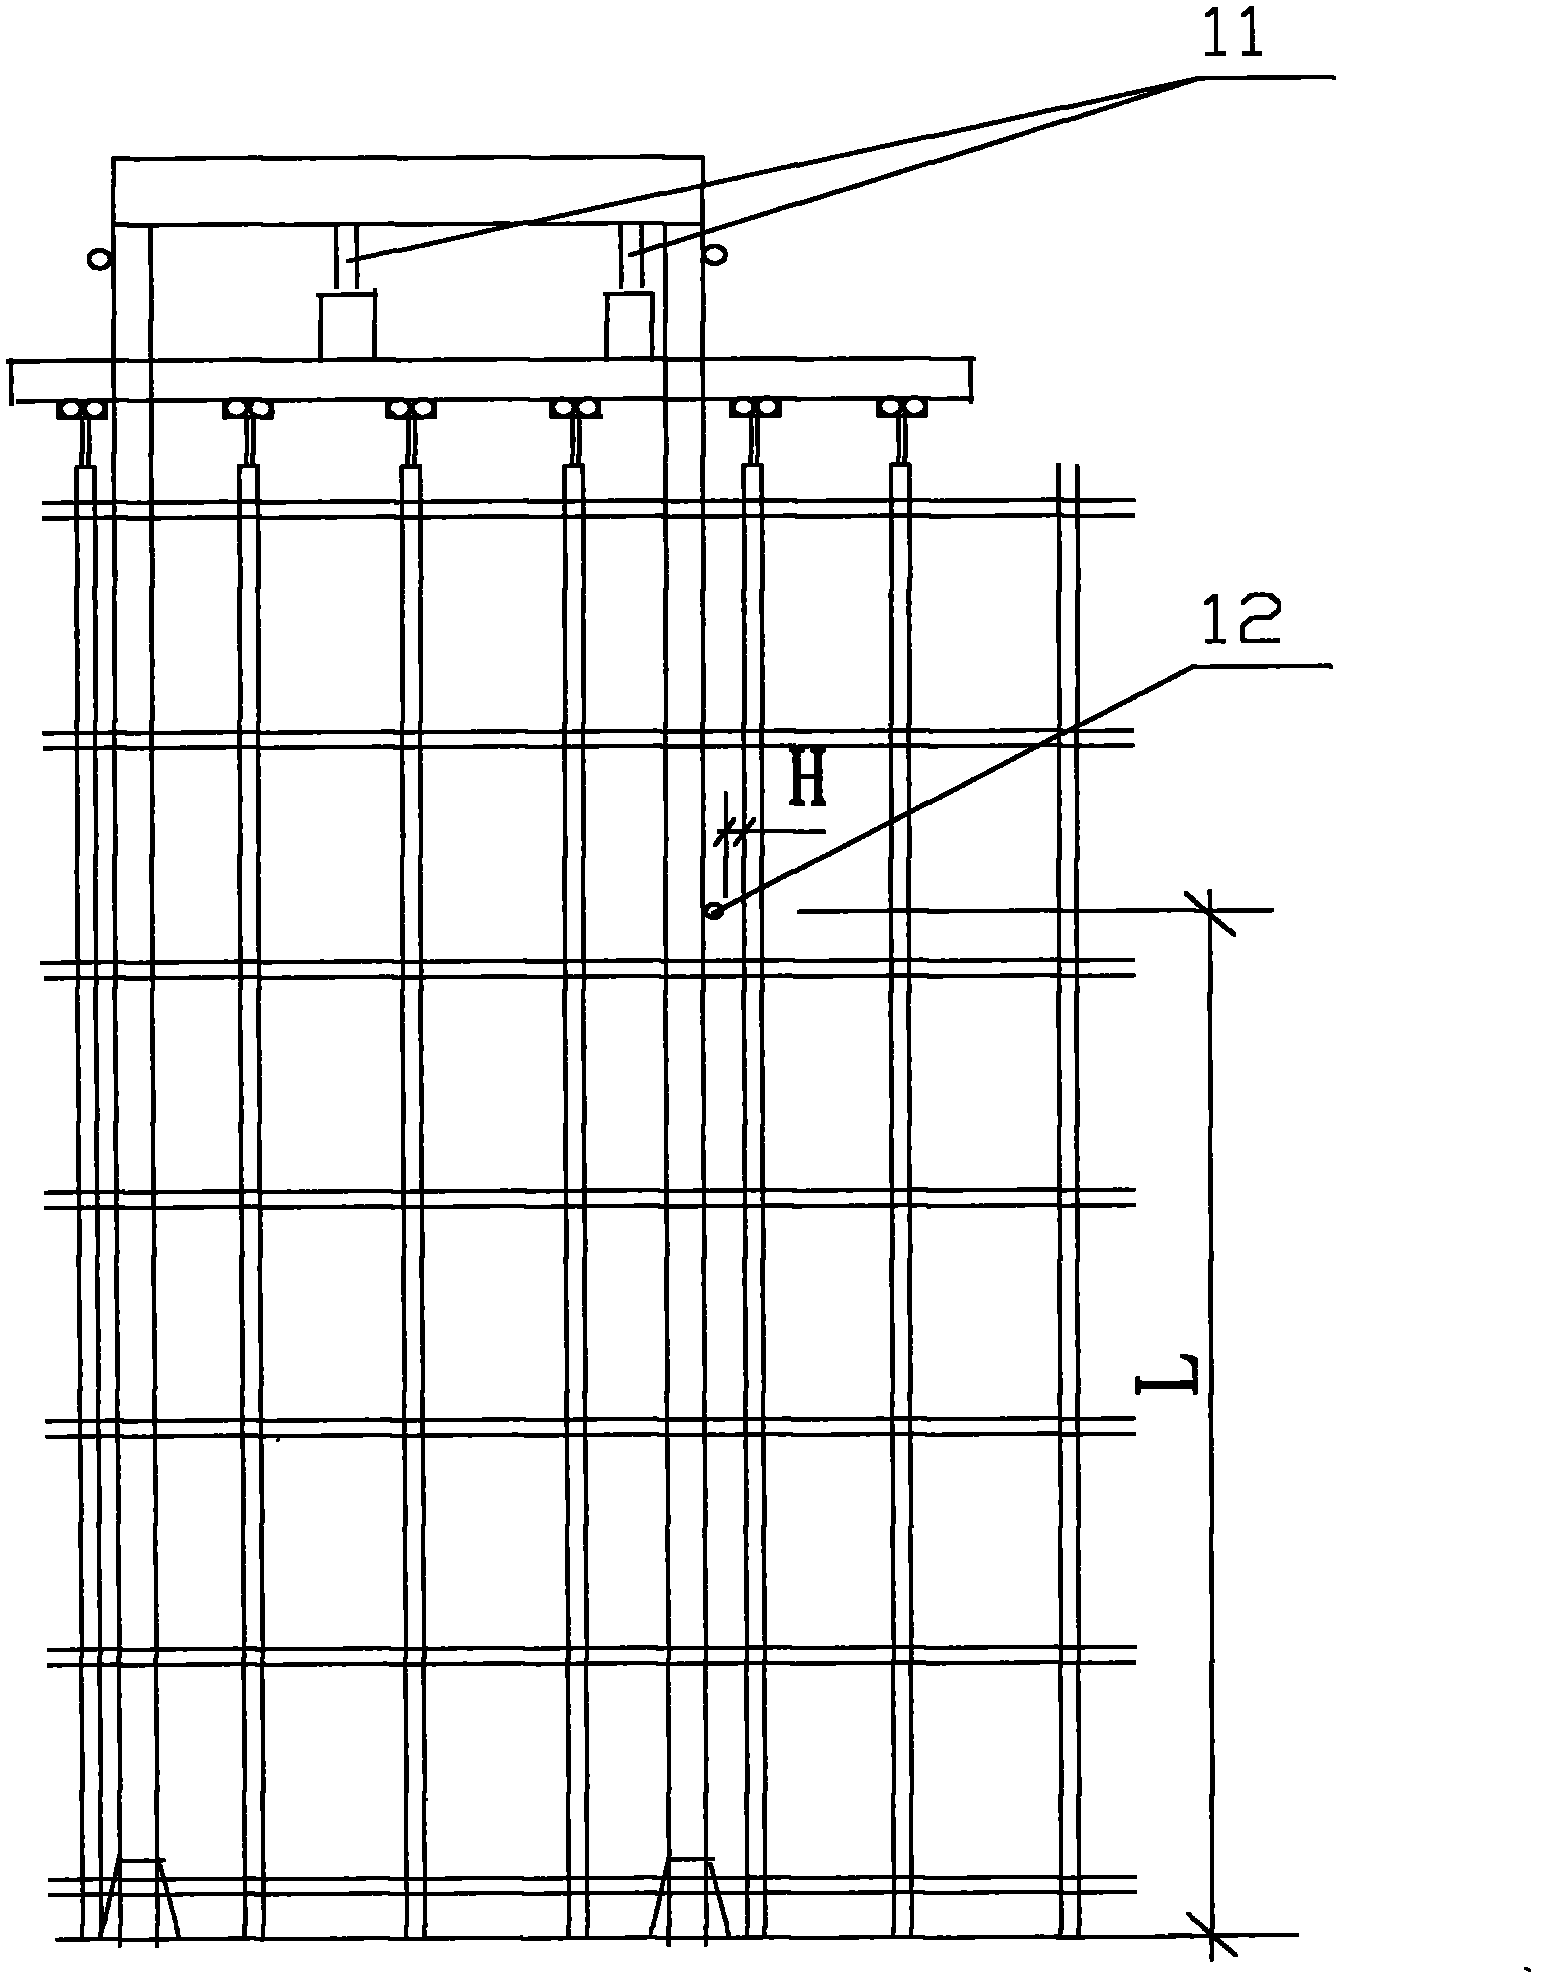 Method for increasing wall connecting piece and improving and determining bearing capacity of support frame